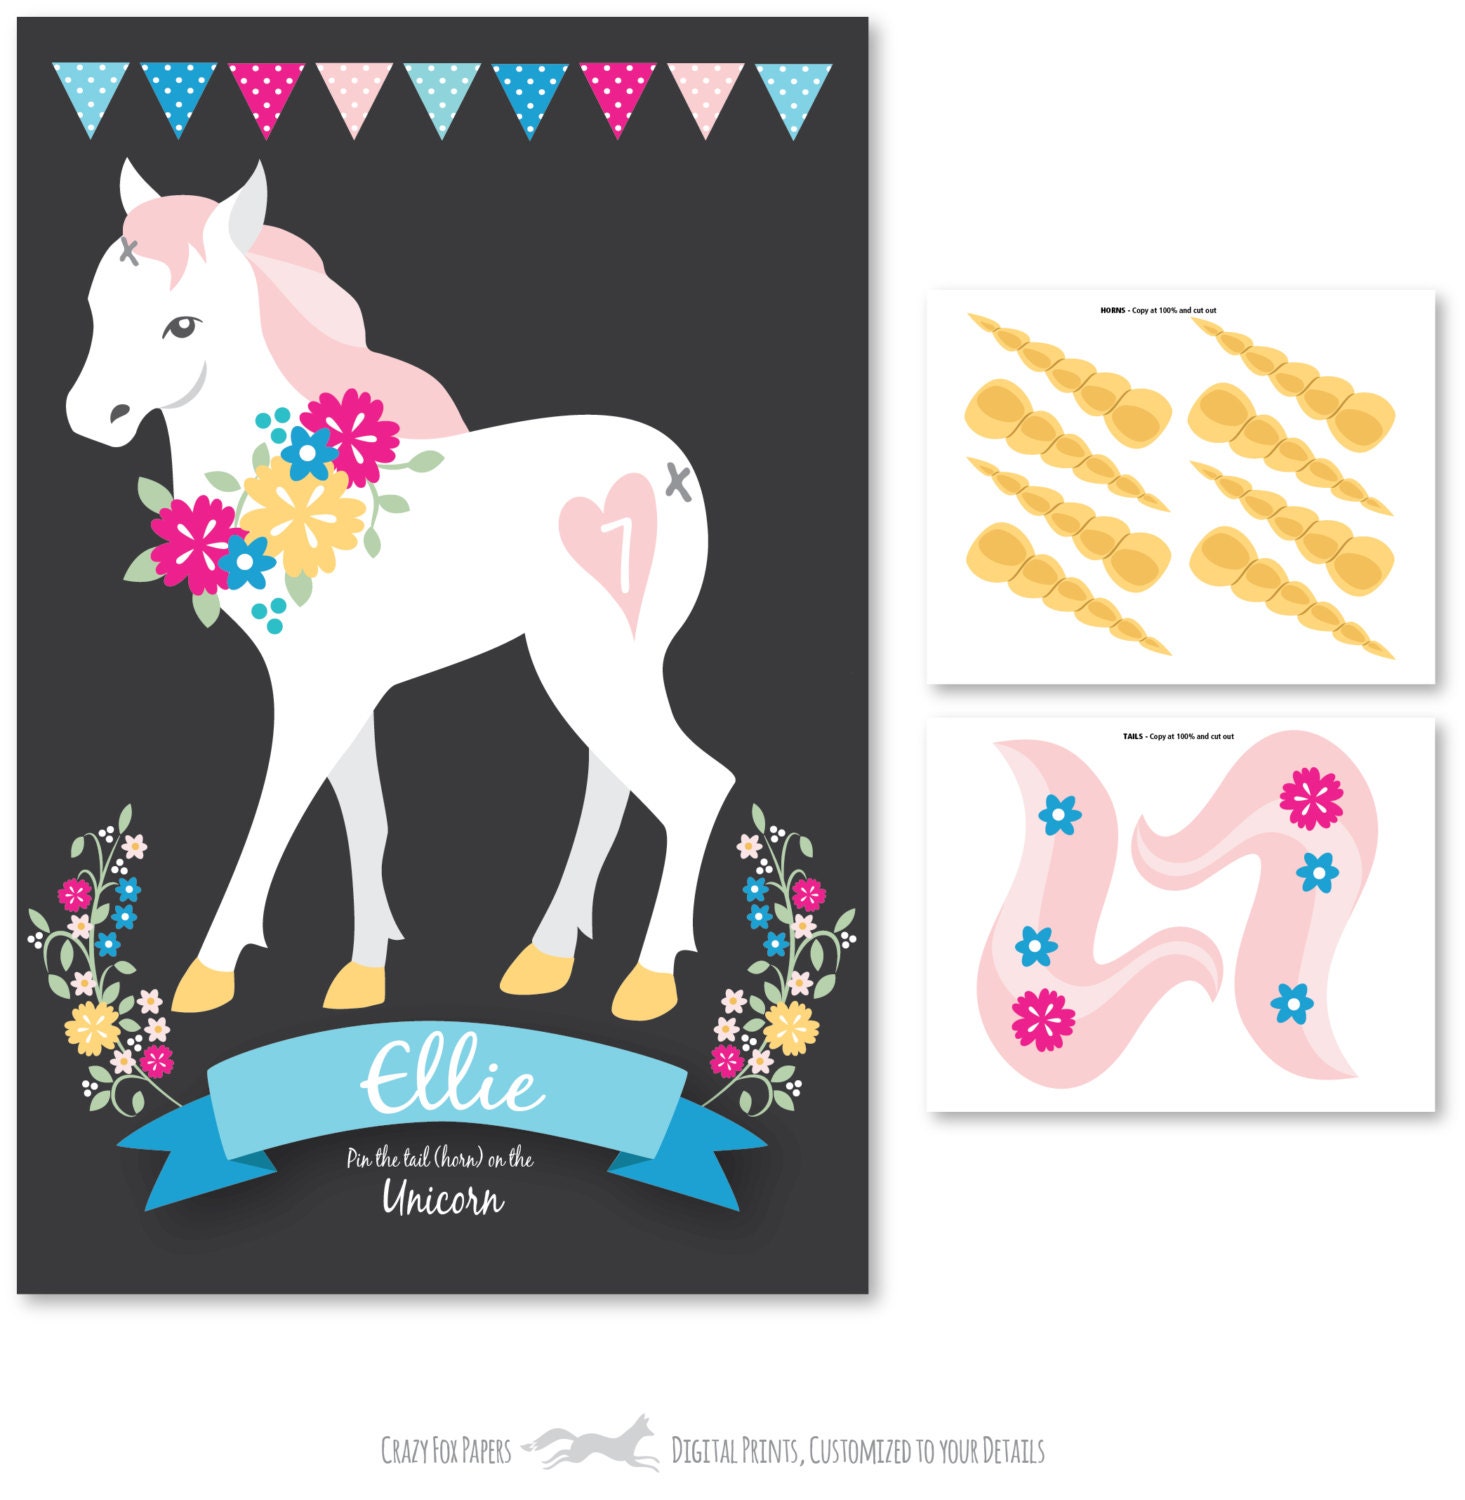 The Best Pin the Tail on the Unicorn Printable Ruby Website